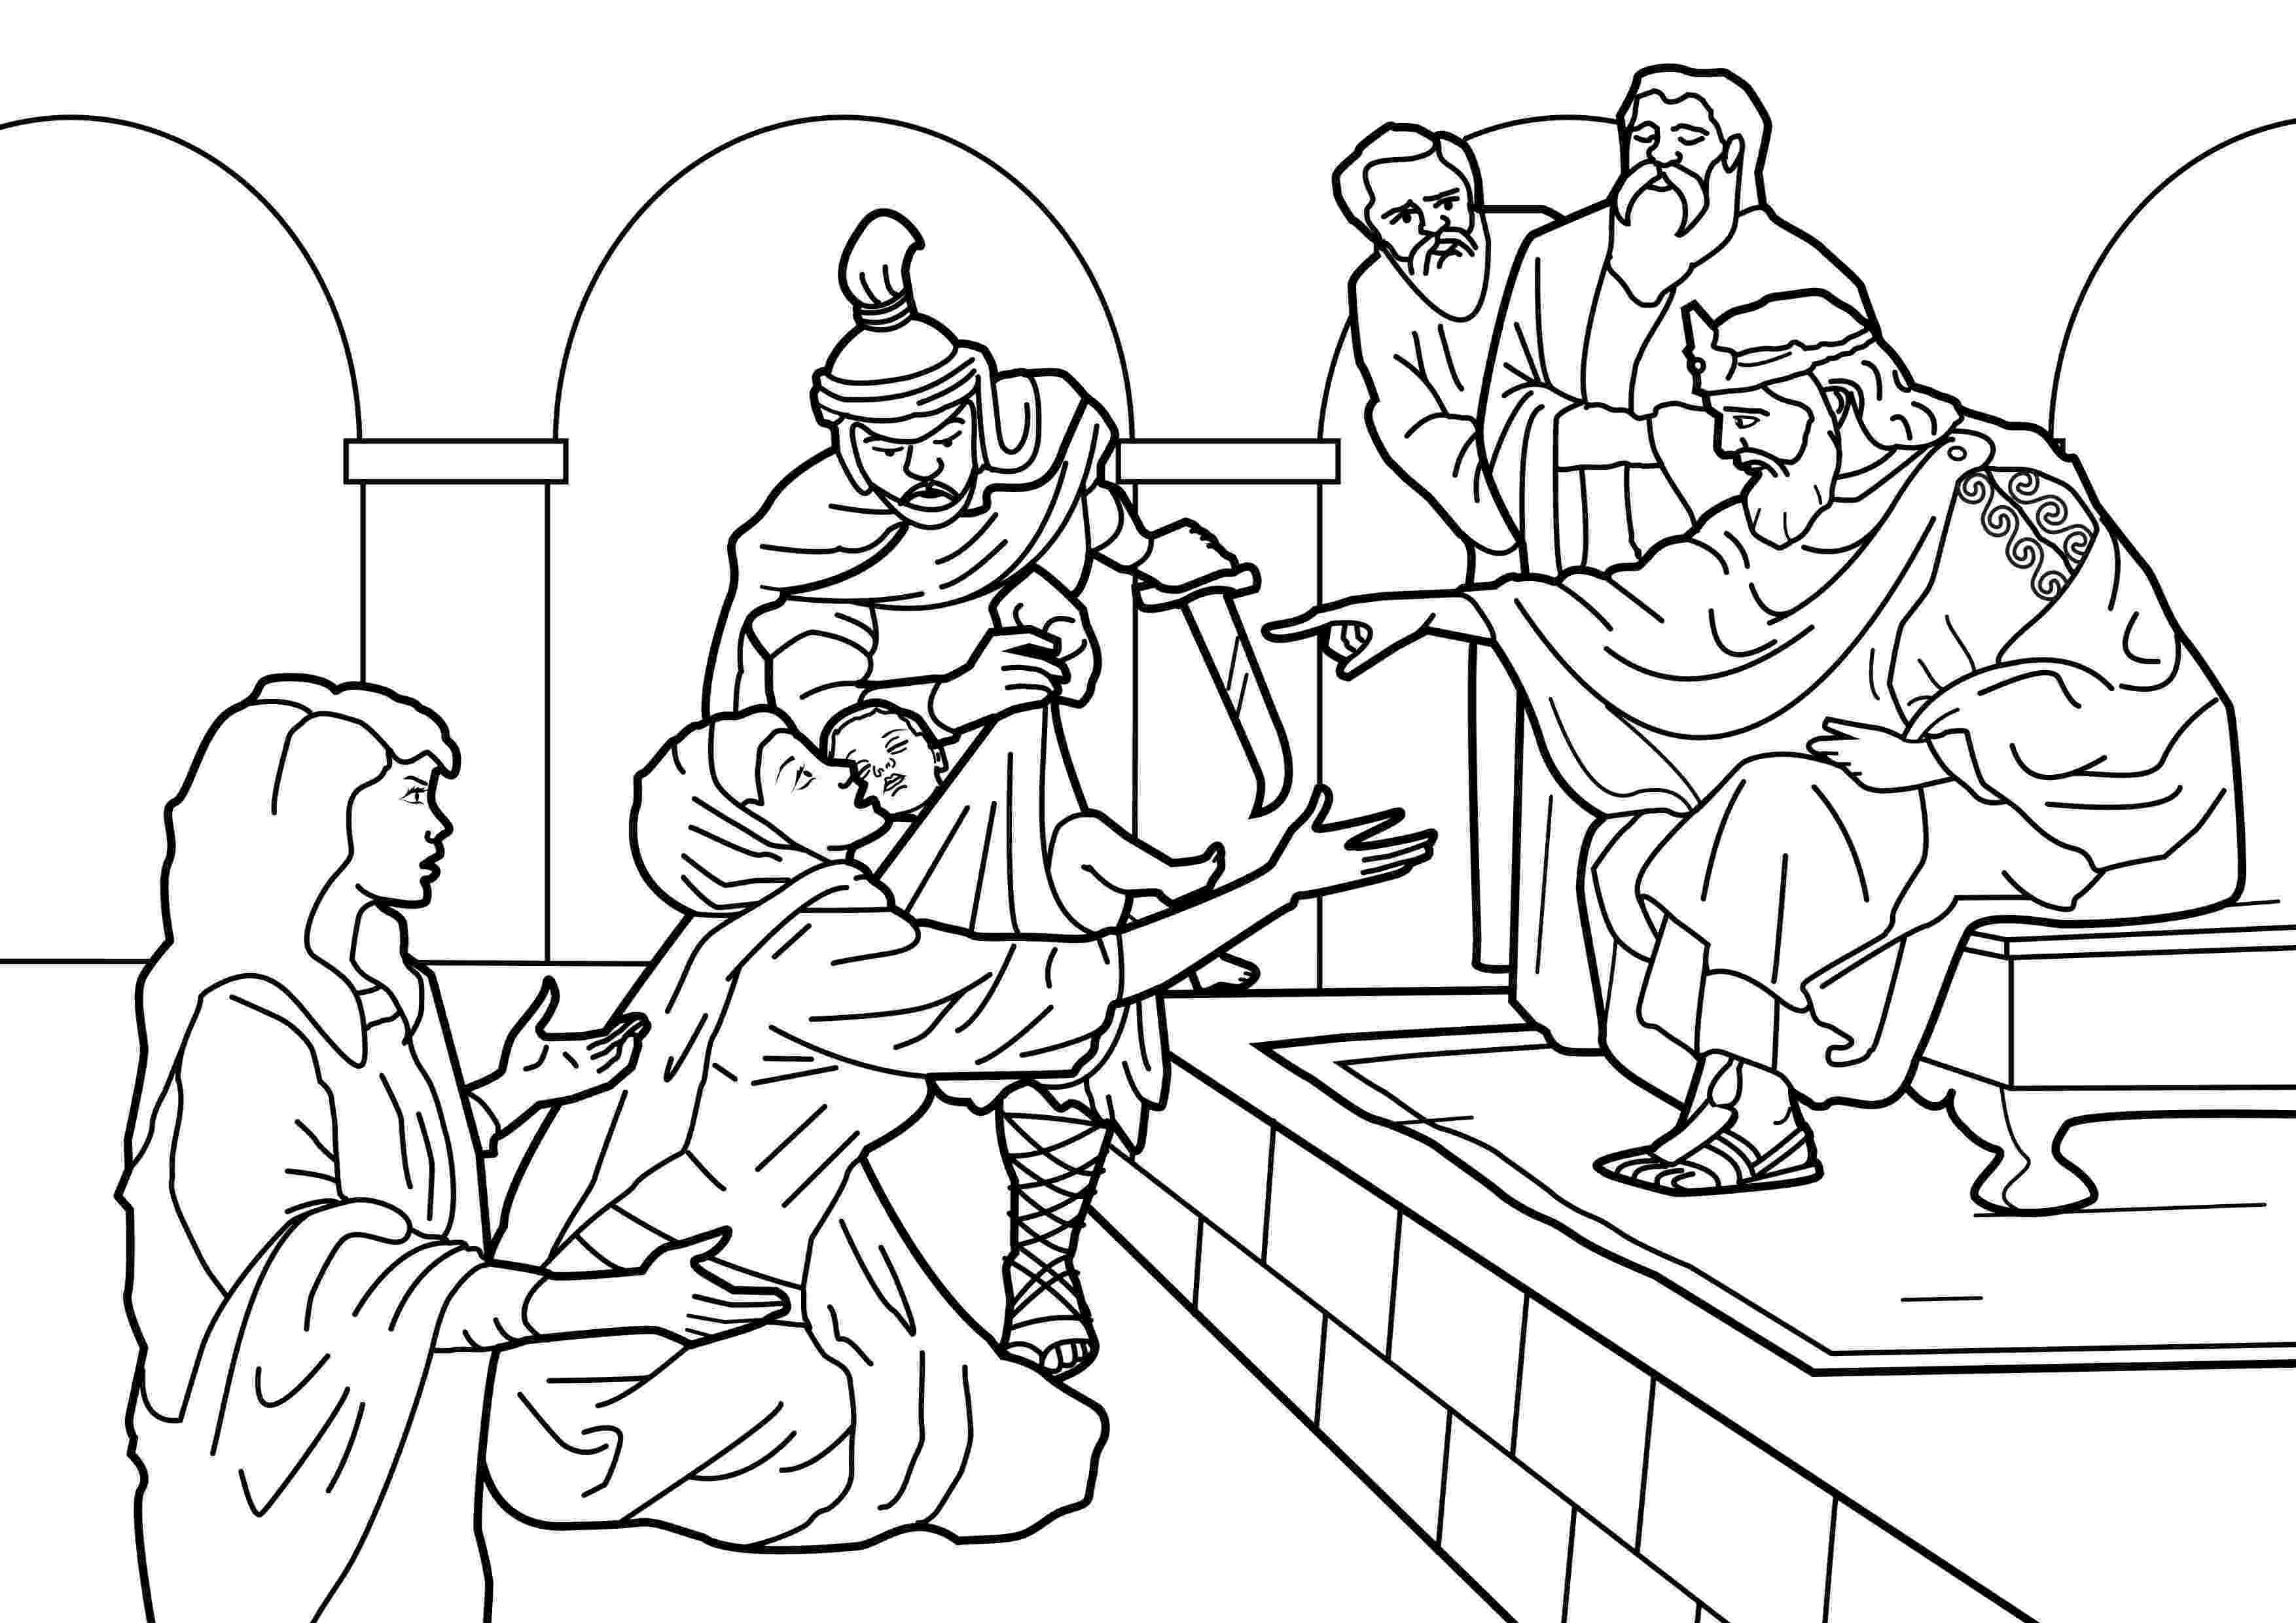 king solomon coloring pages king solomon drawing at getdrawingscom free for pages coloring solomon king 